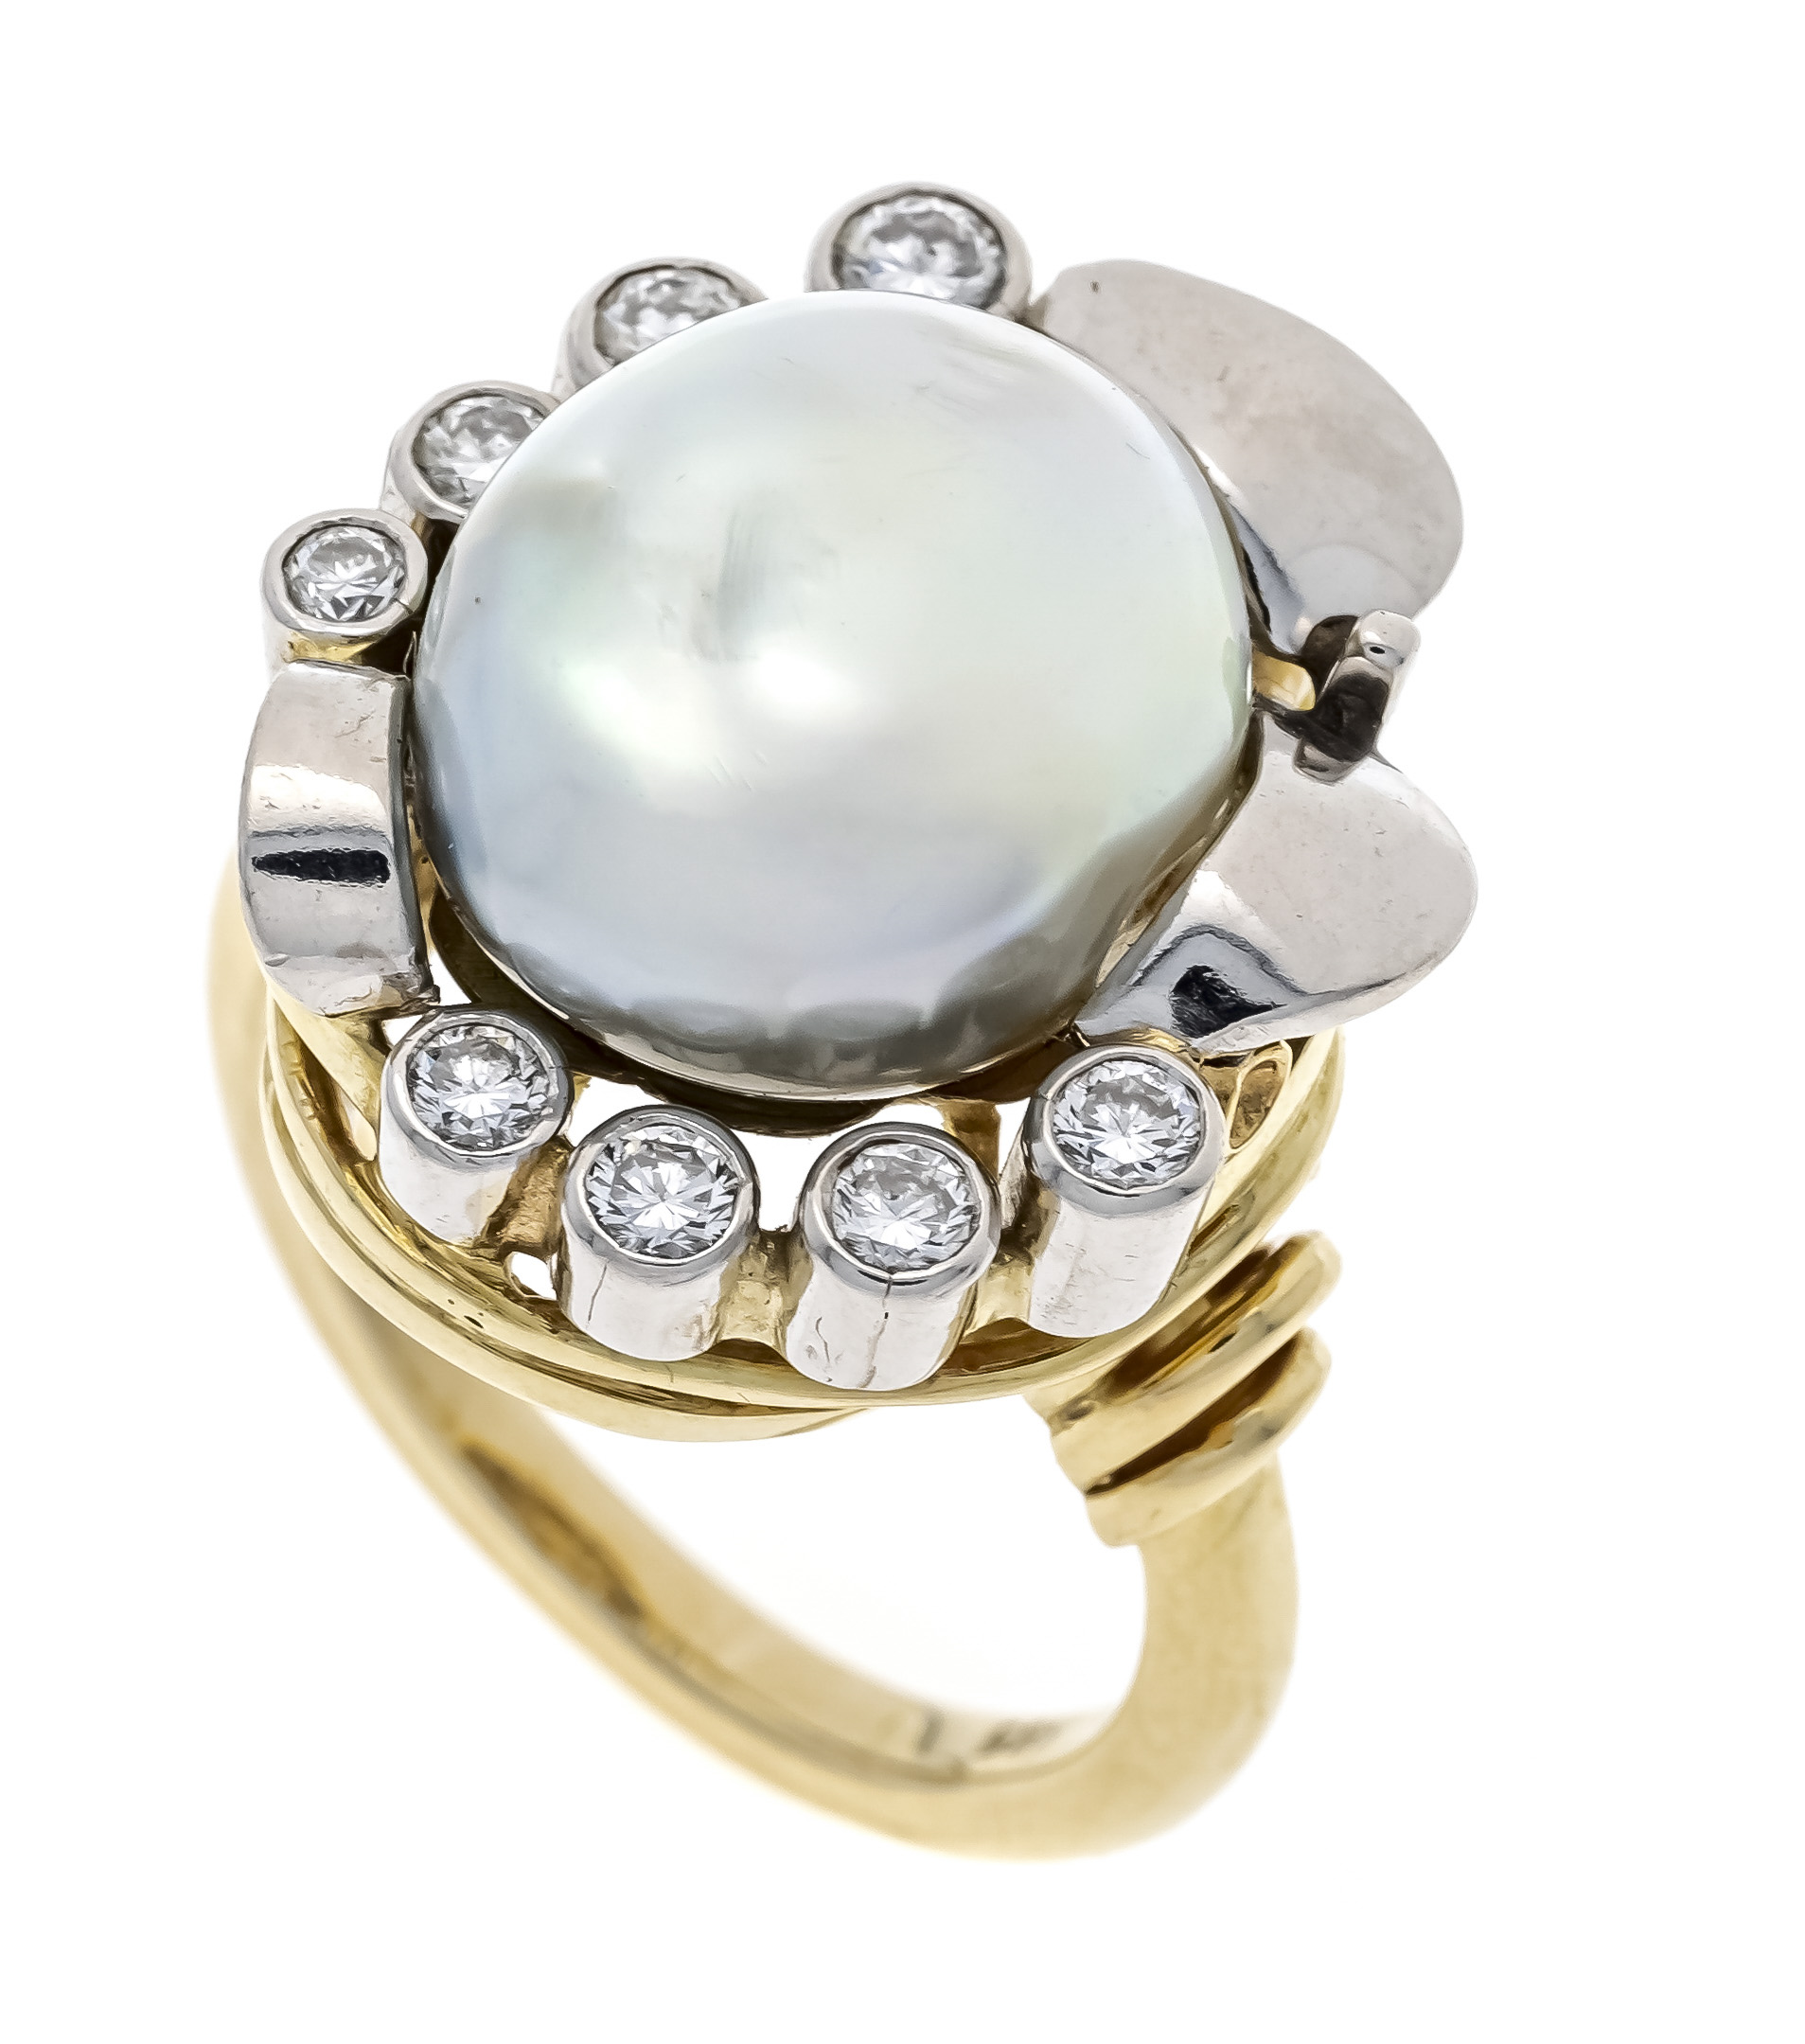 South Sea pearl diamond ring GG/WG 585/000 with a South Sea cultured pearl 14.2 x 12.0 mm in light